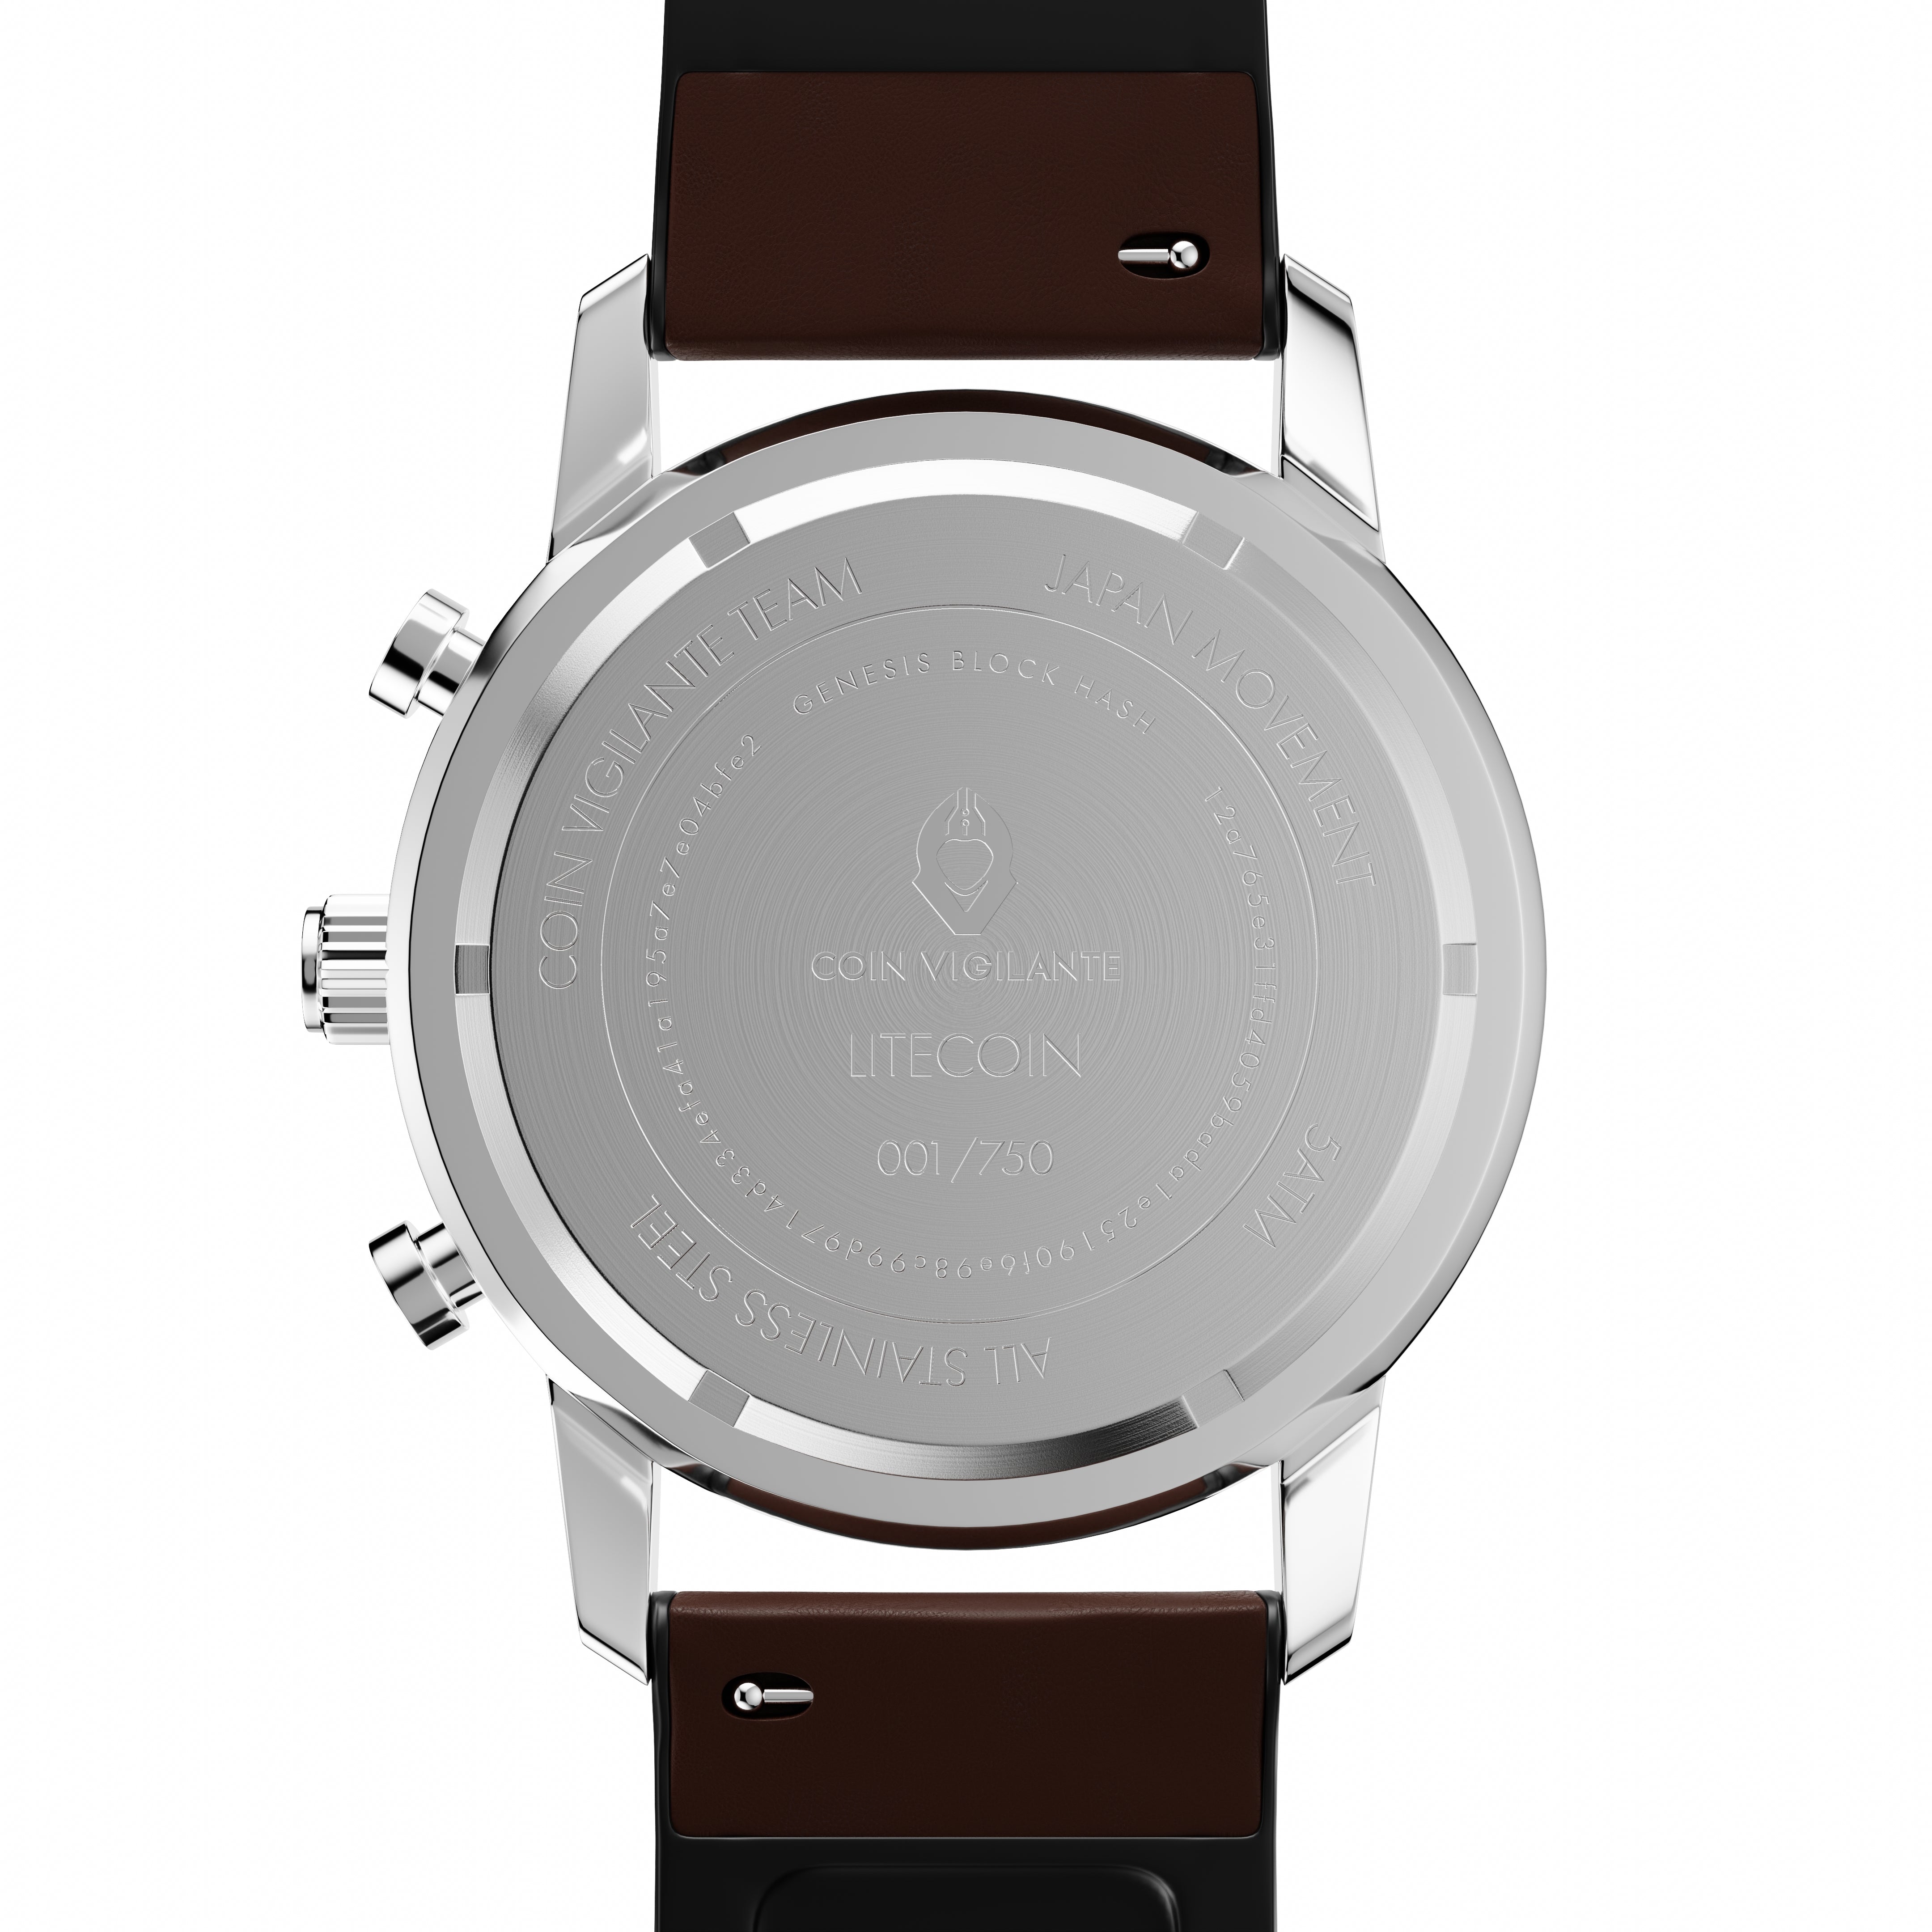 Litecoin Watch Model F - First Limited Edition (Only 750 in existence)